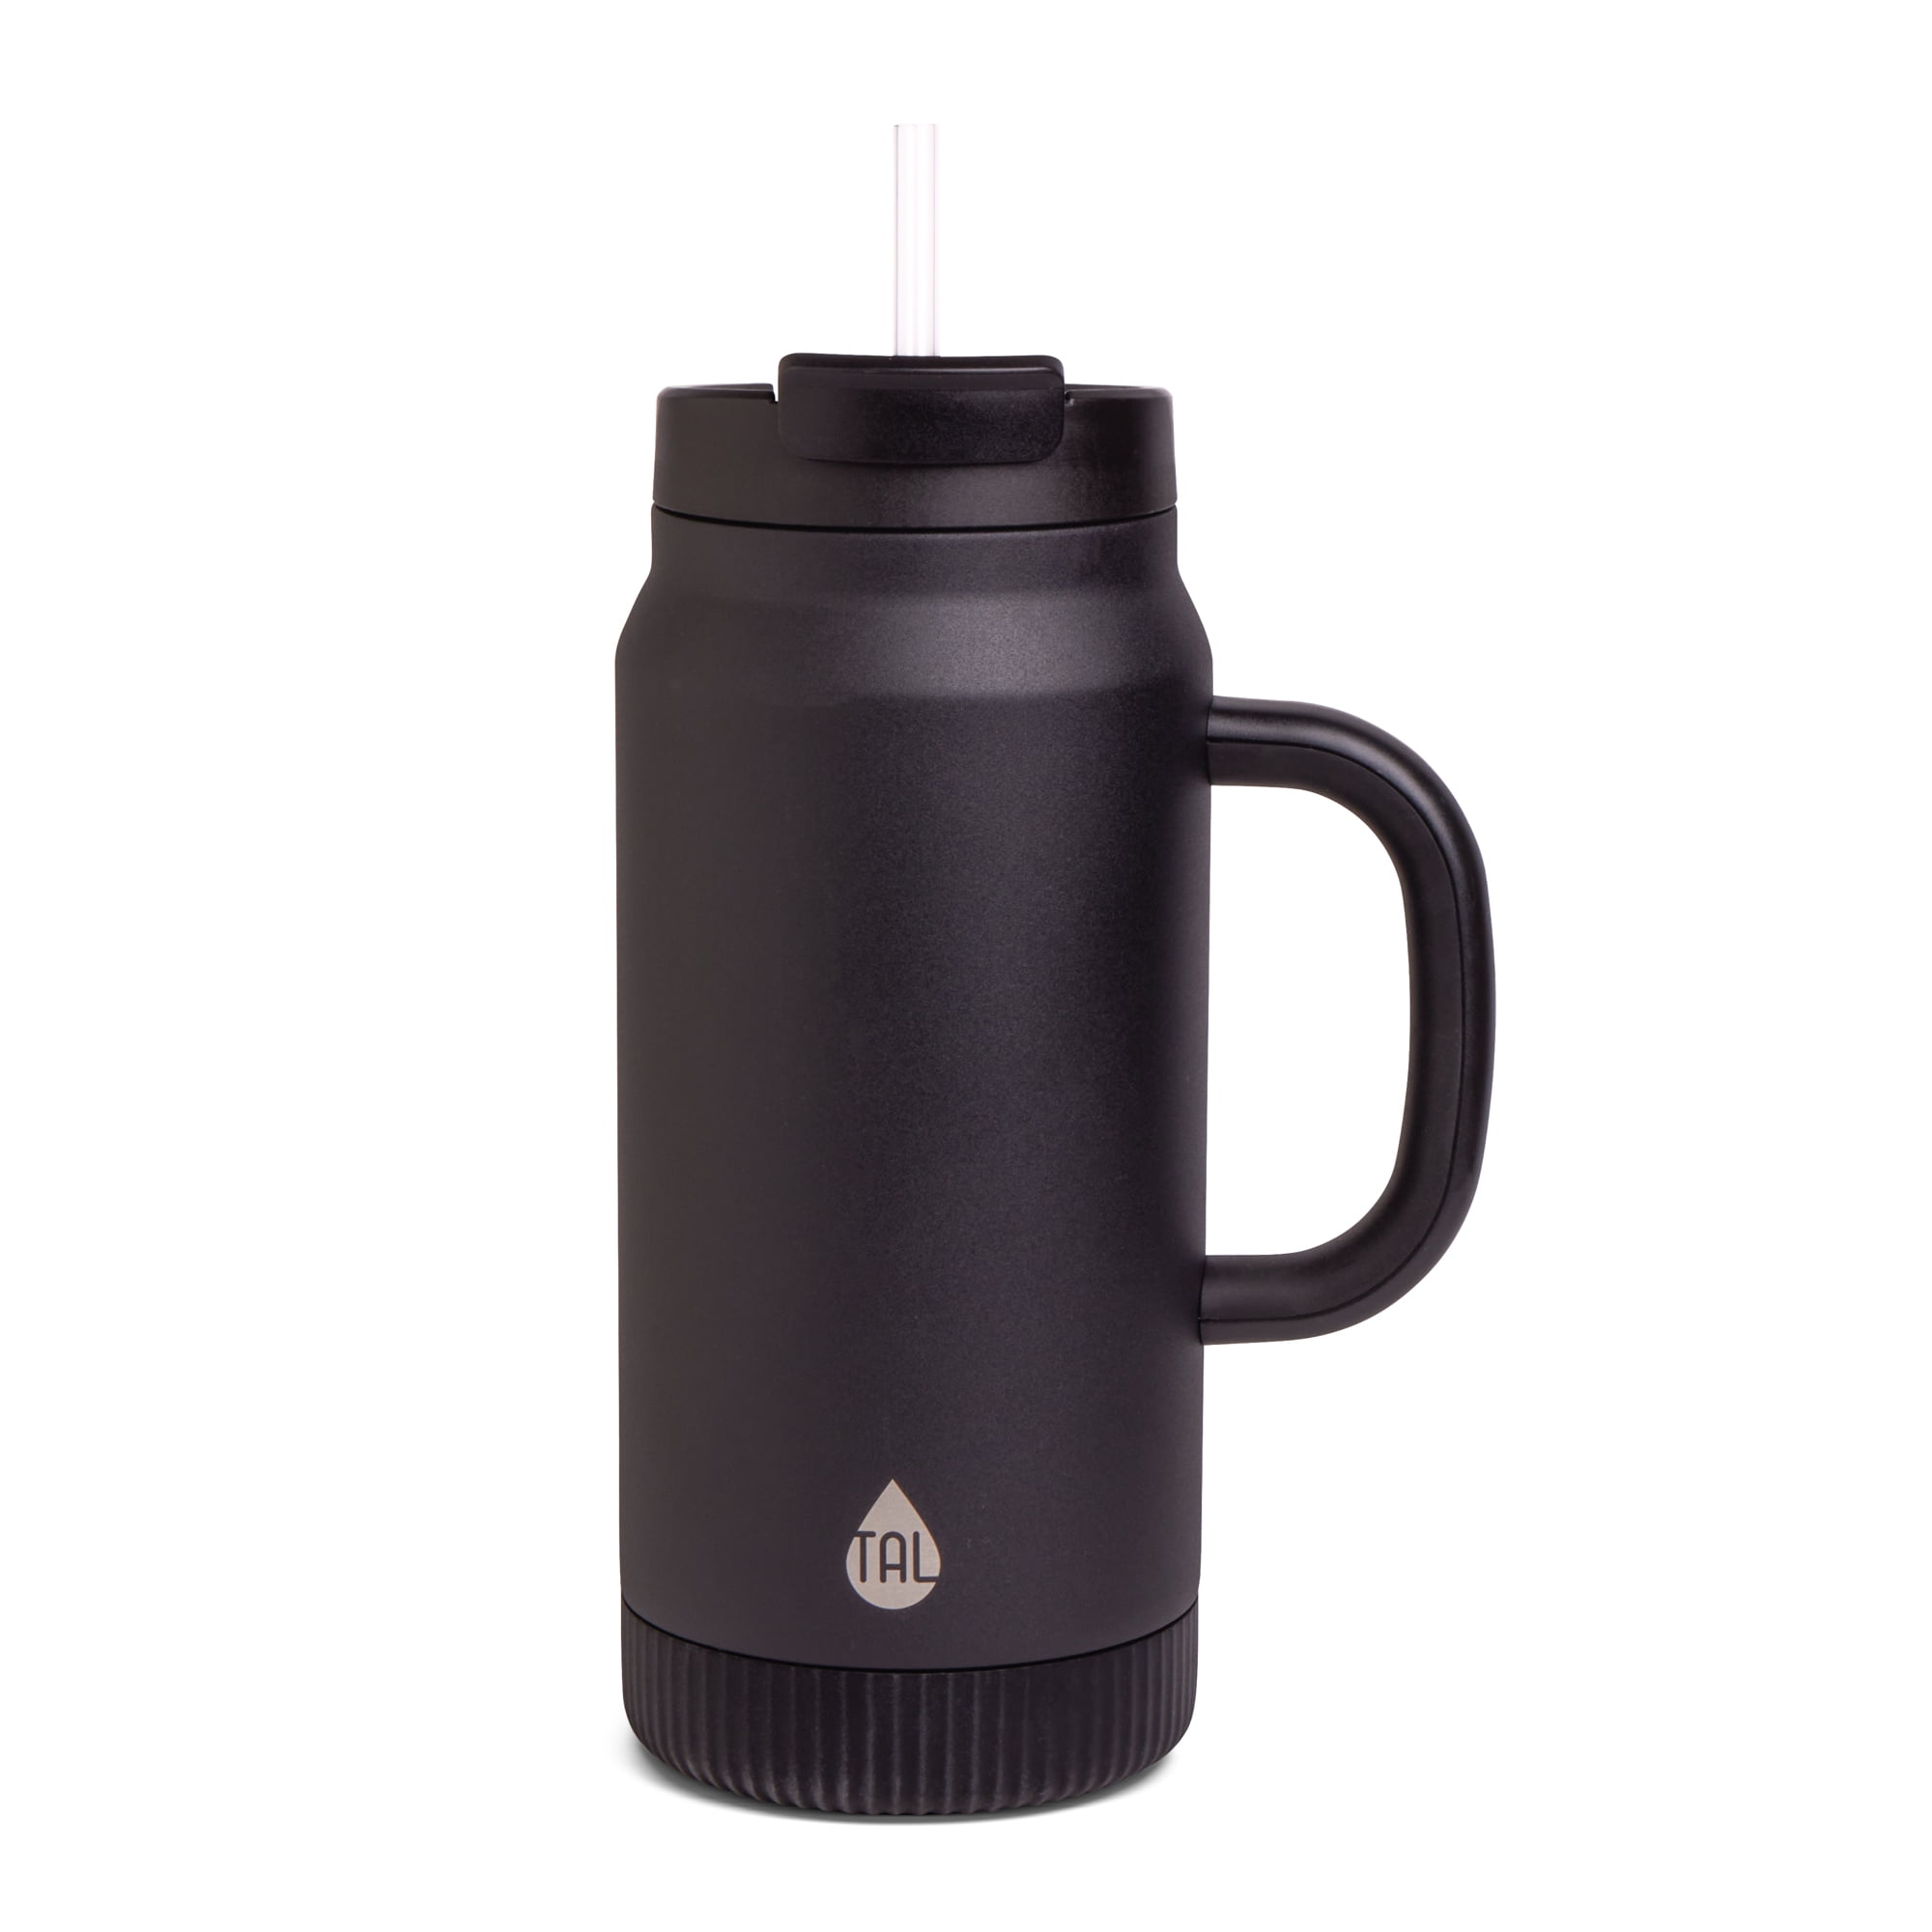 Stanley® Quencher H2.O FlowState™ Tumbler - 40 oz